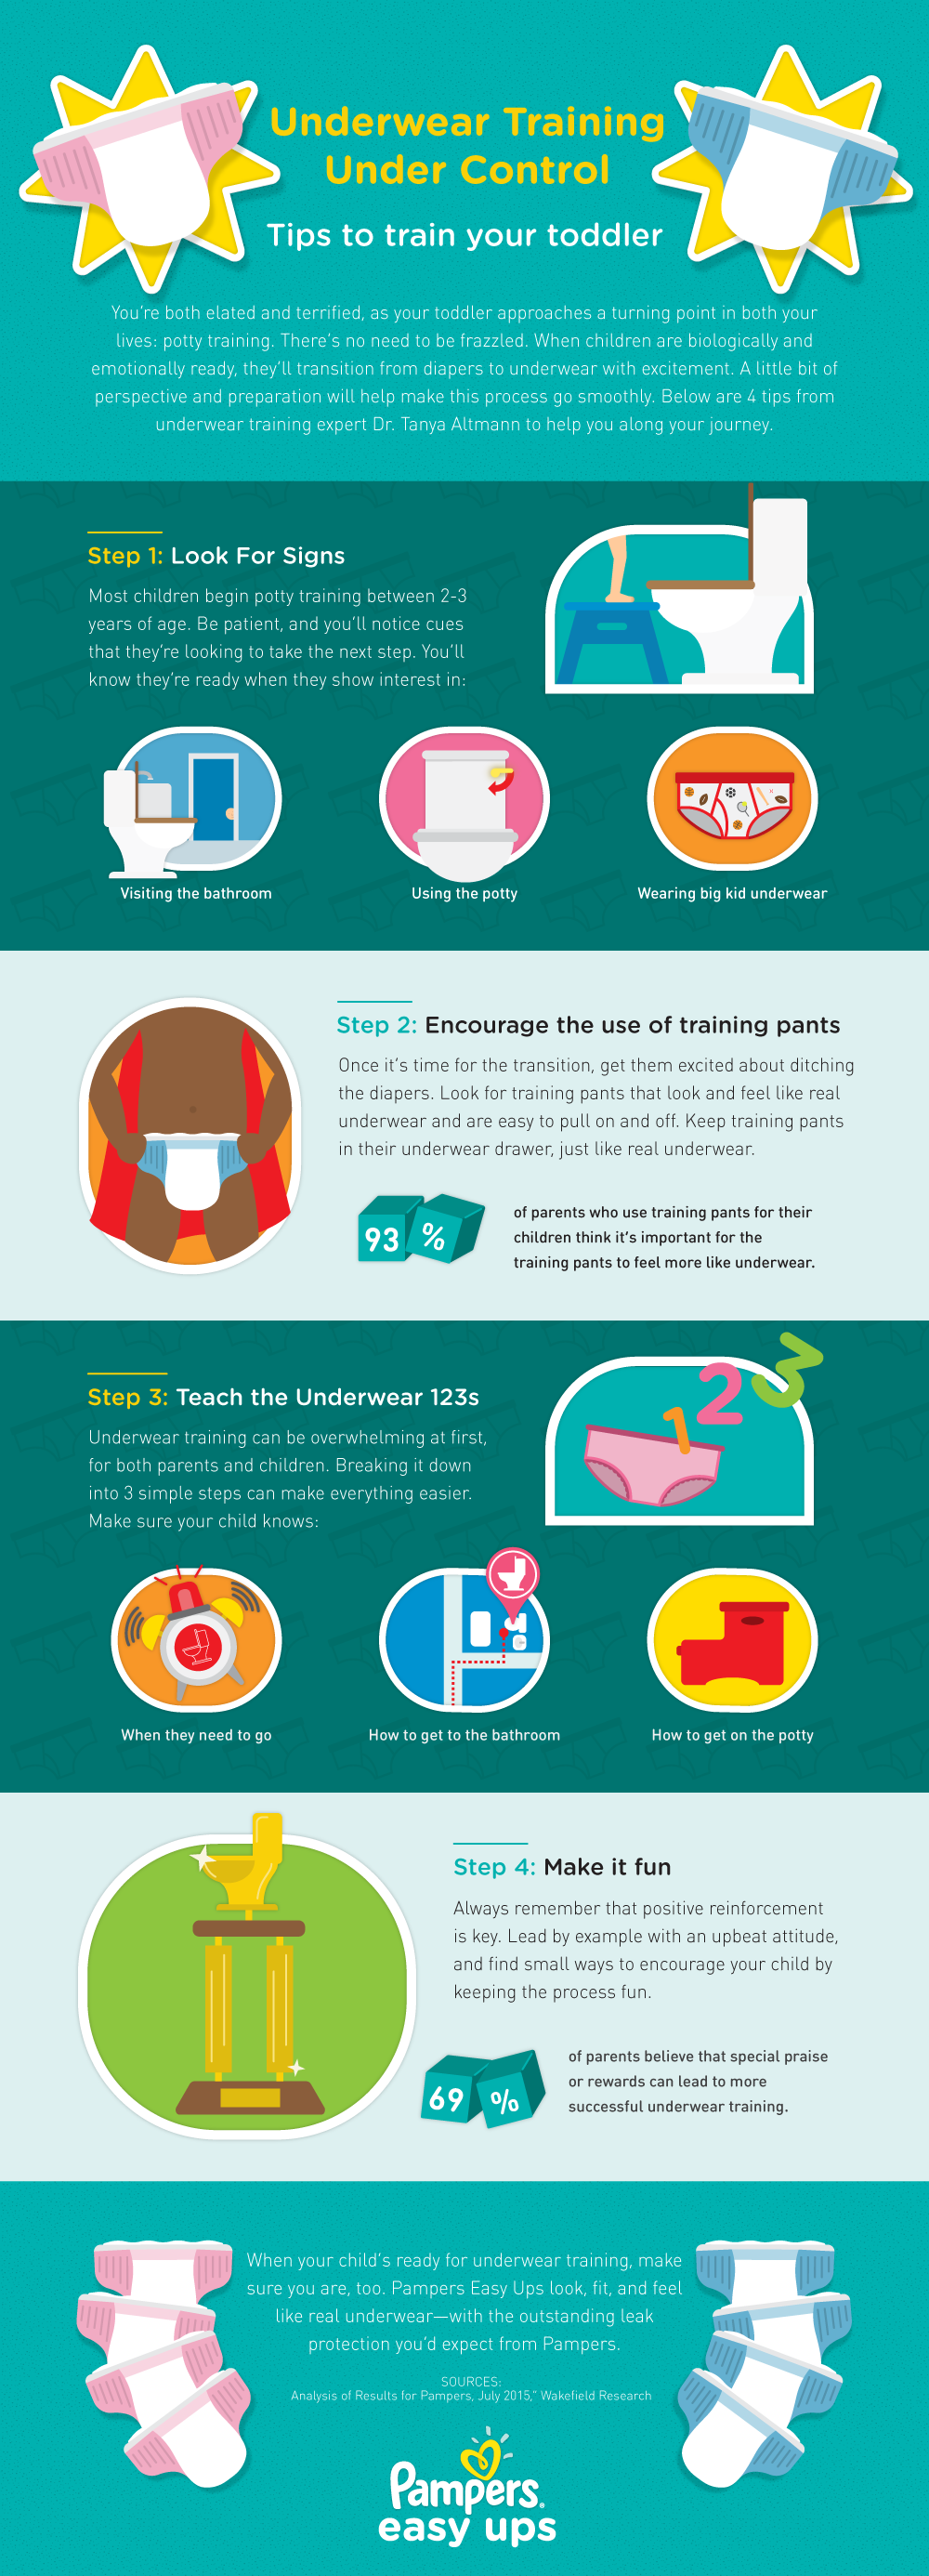 pampers_easy-ups_infographic-finalpng